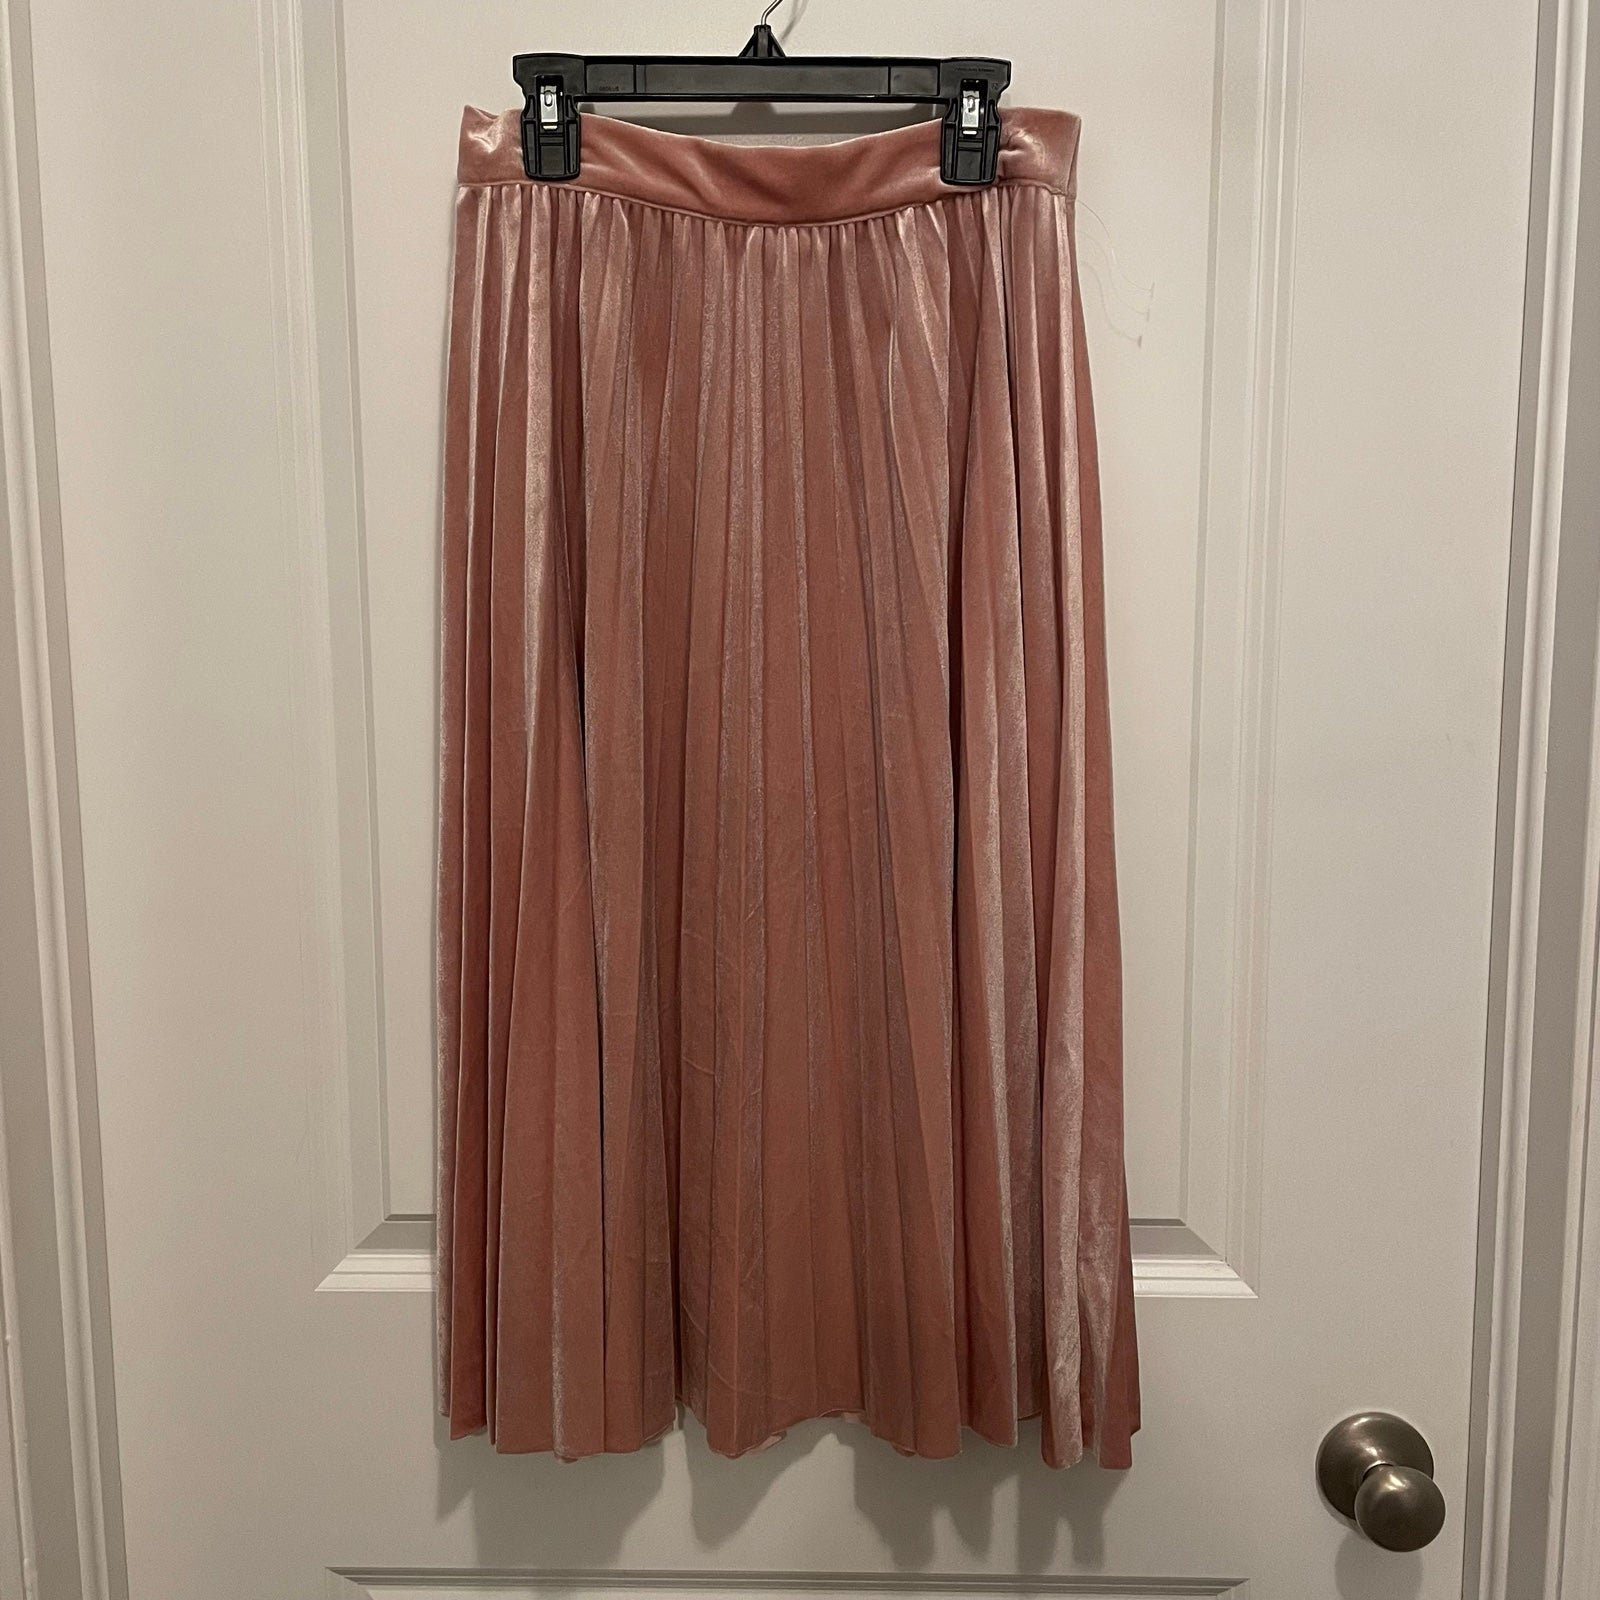 Personality NWOT Simply Styled Petite Pink Velvet Pleated Skirt - Size M ojwpMKLOM Factory Price